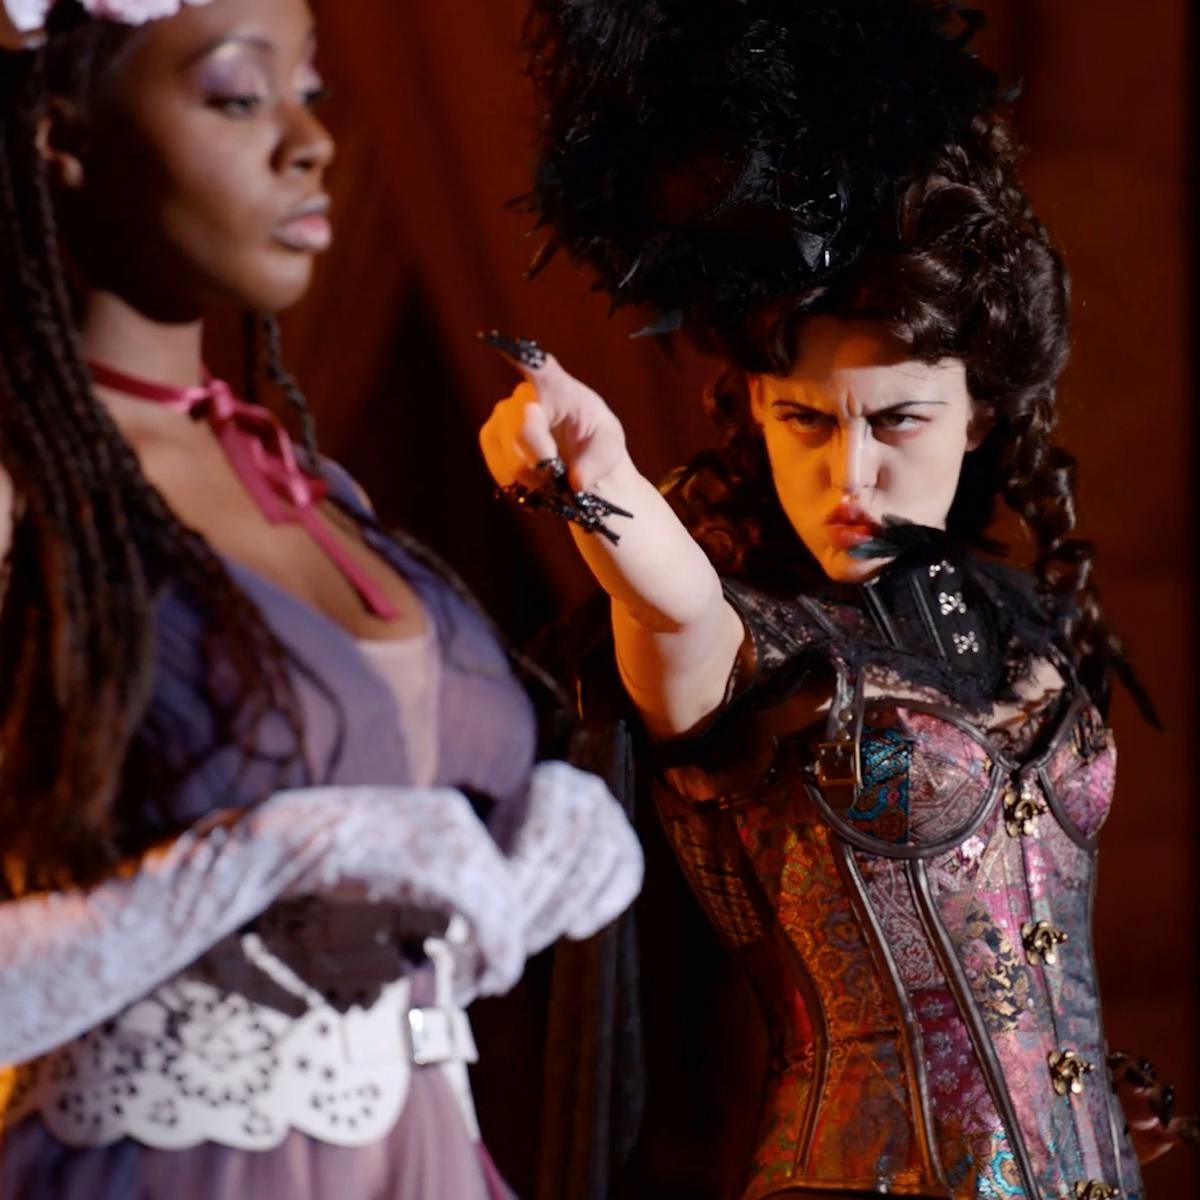 Josephine (Tameka Griffiths) and Lady Blair (Sara Waisglass) onstage. Josephine wears a red ribbon necklace and gloves. Lady Blair wears a bustier and elaborate hat.